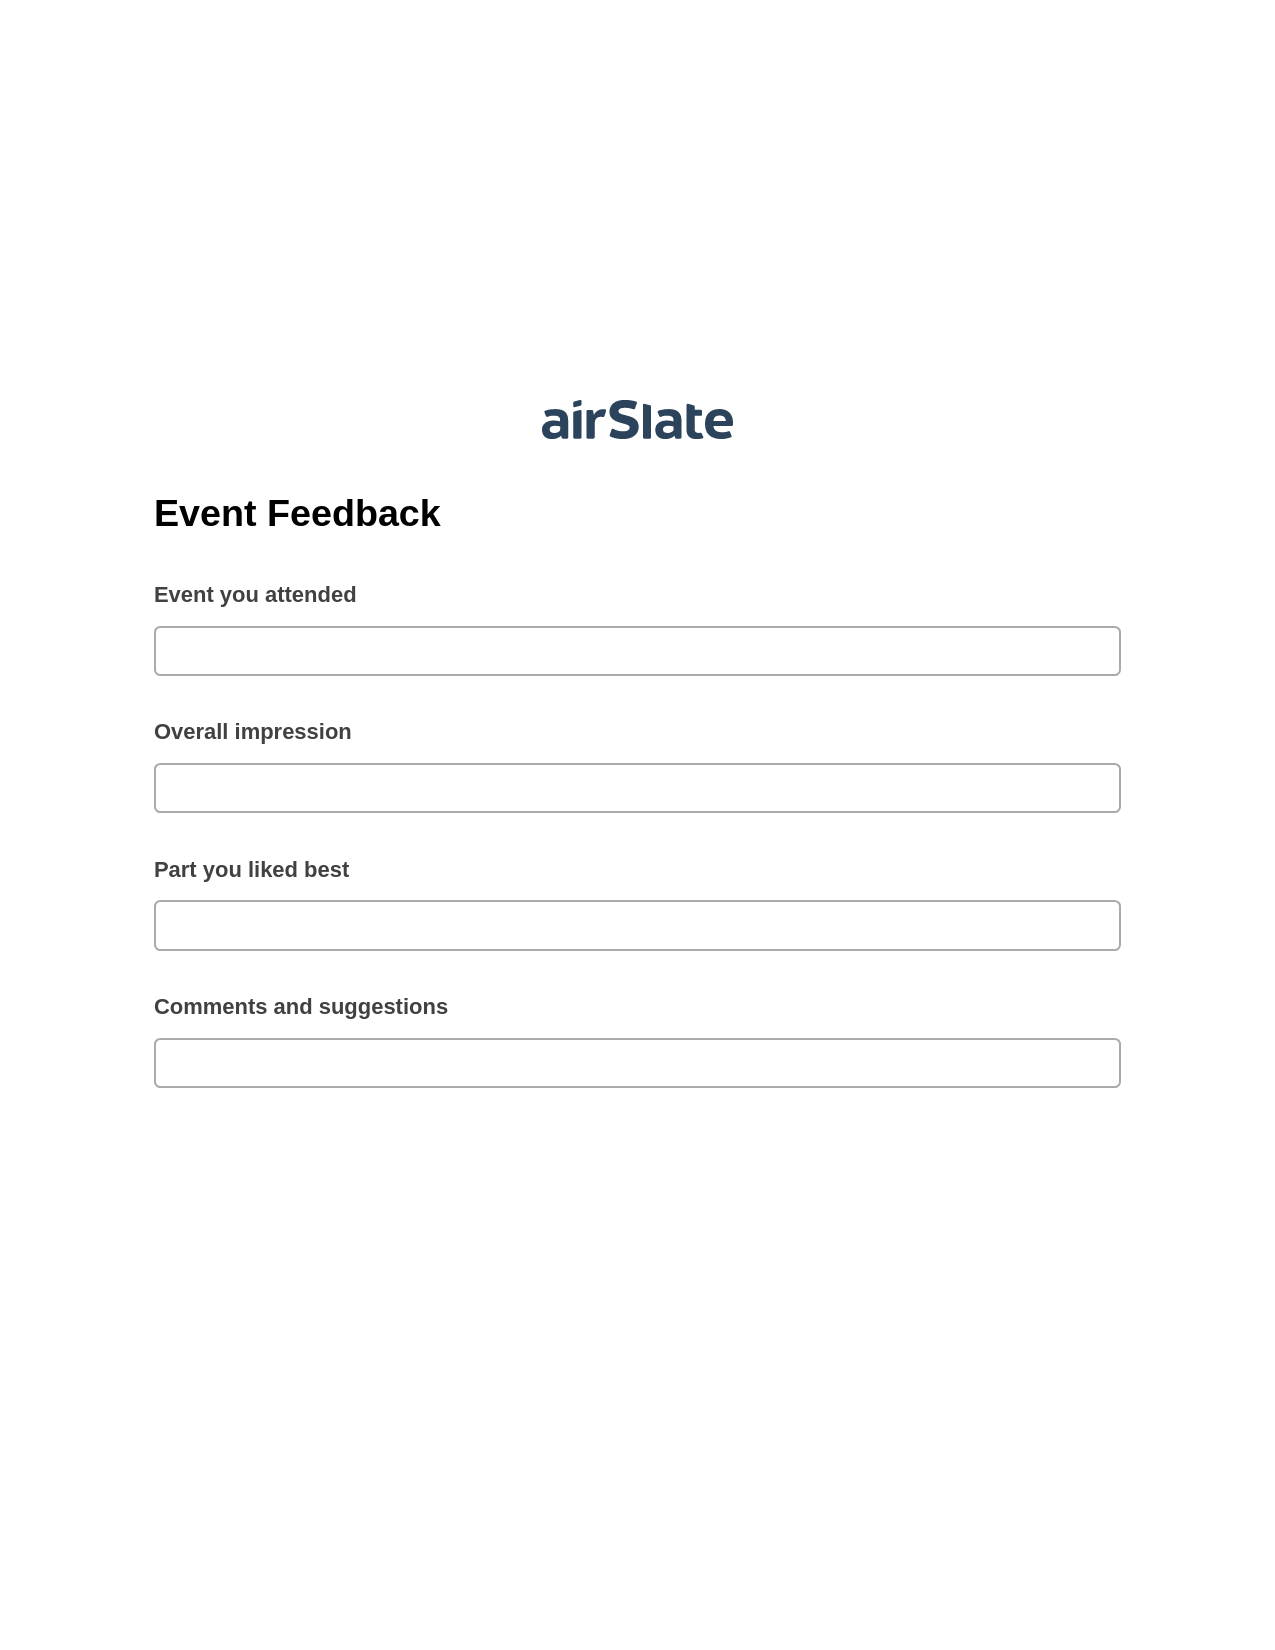 Event Feedback Pre-fill from Salesforce Records with SOQL Bot, Assign Slate Name Bot, Archive to SharePoint Folder Bot